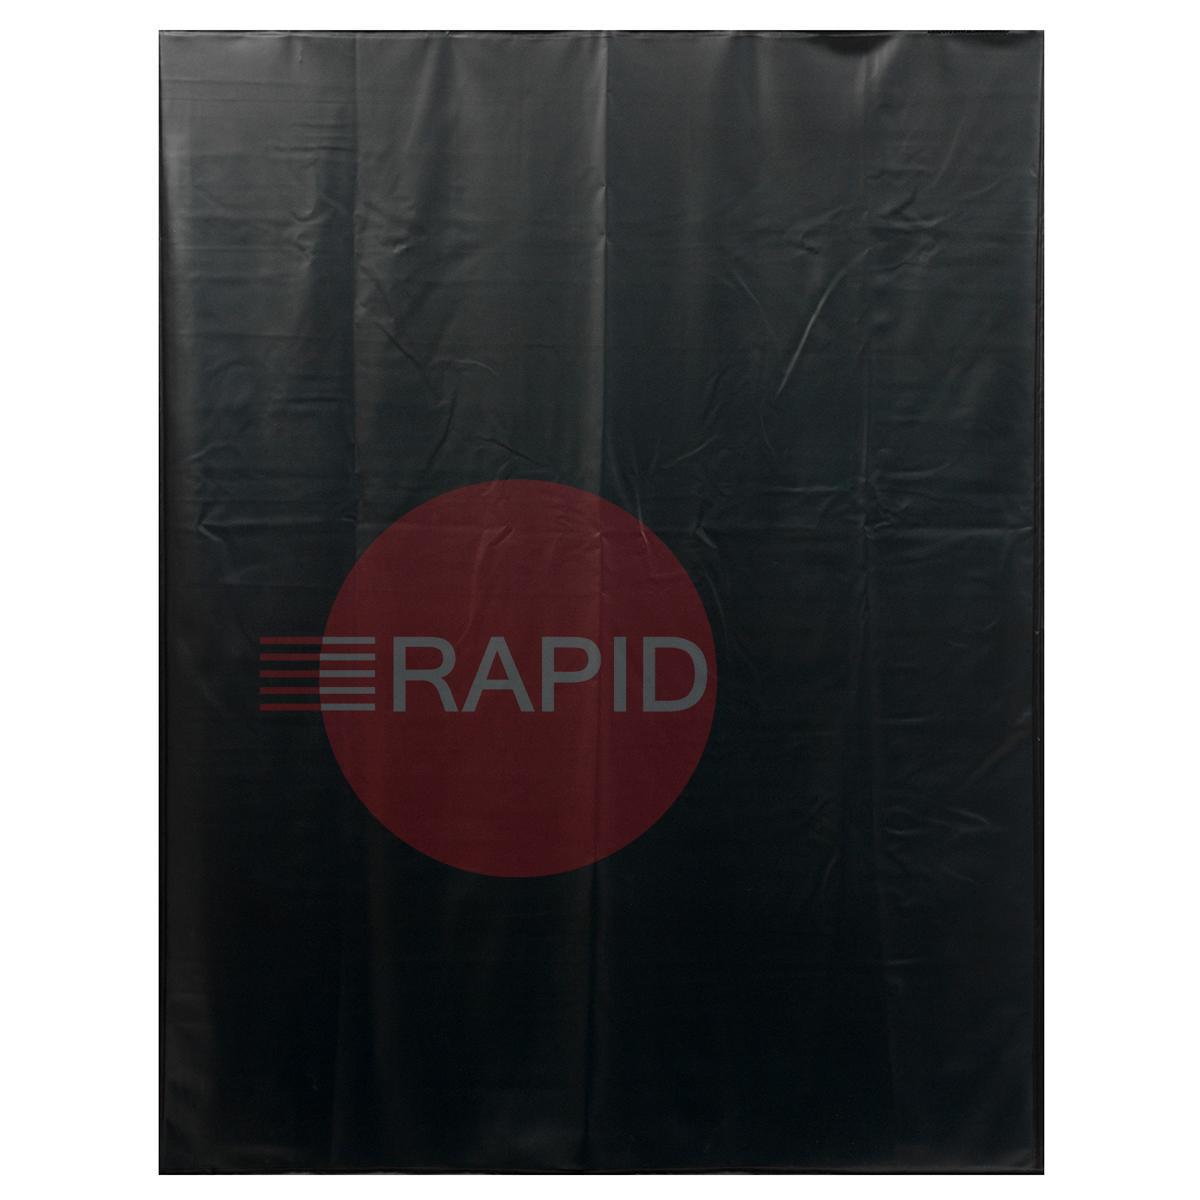 18.19.18.0002  CEPRO Green-9 Replacement Curtain Set for Robusto XL Triptych Welding Screens - 4.4m x 1.8m, Approved EN 25980